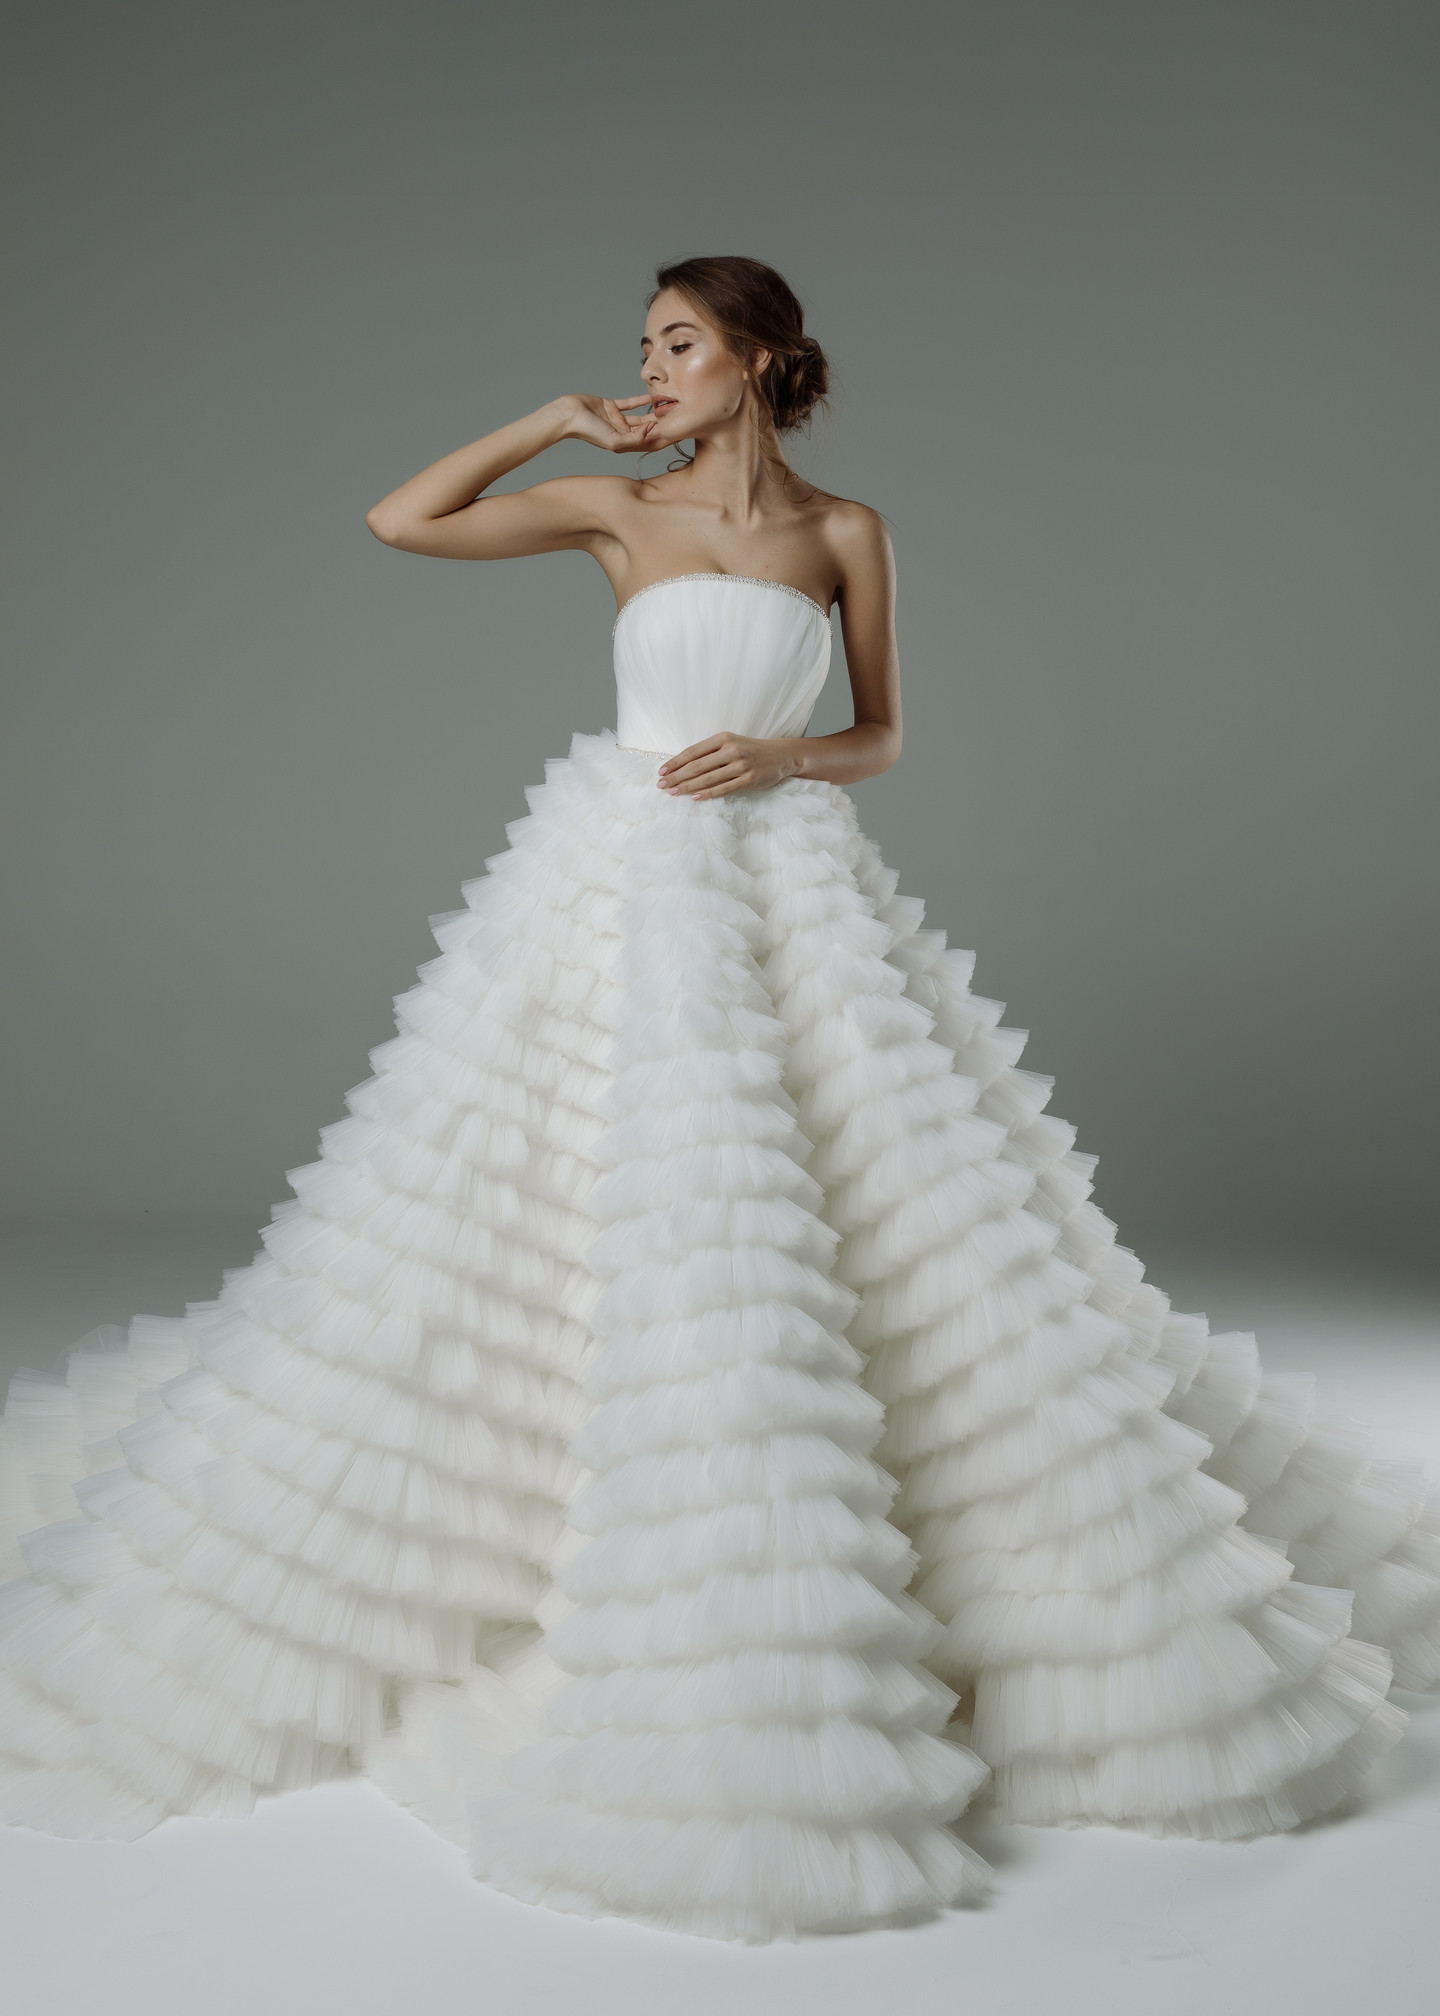 Isidora gown, 2019, couture, dress, bridal, off-white, tulle, embroidery, train, lacing corset, full silhouette, popular